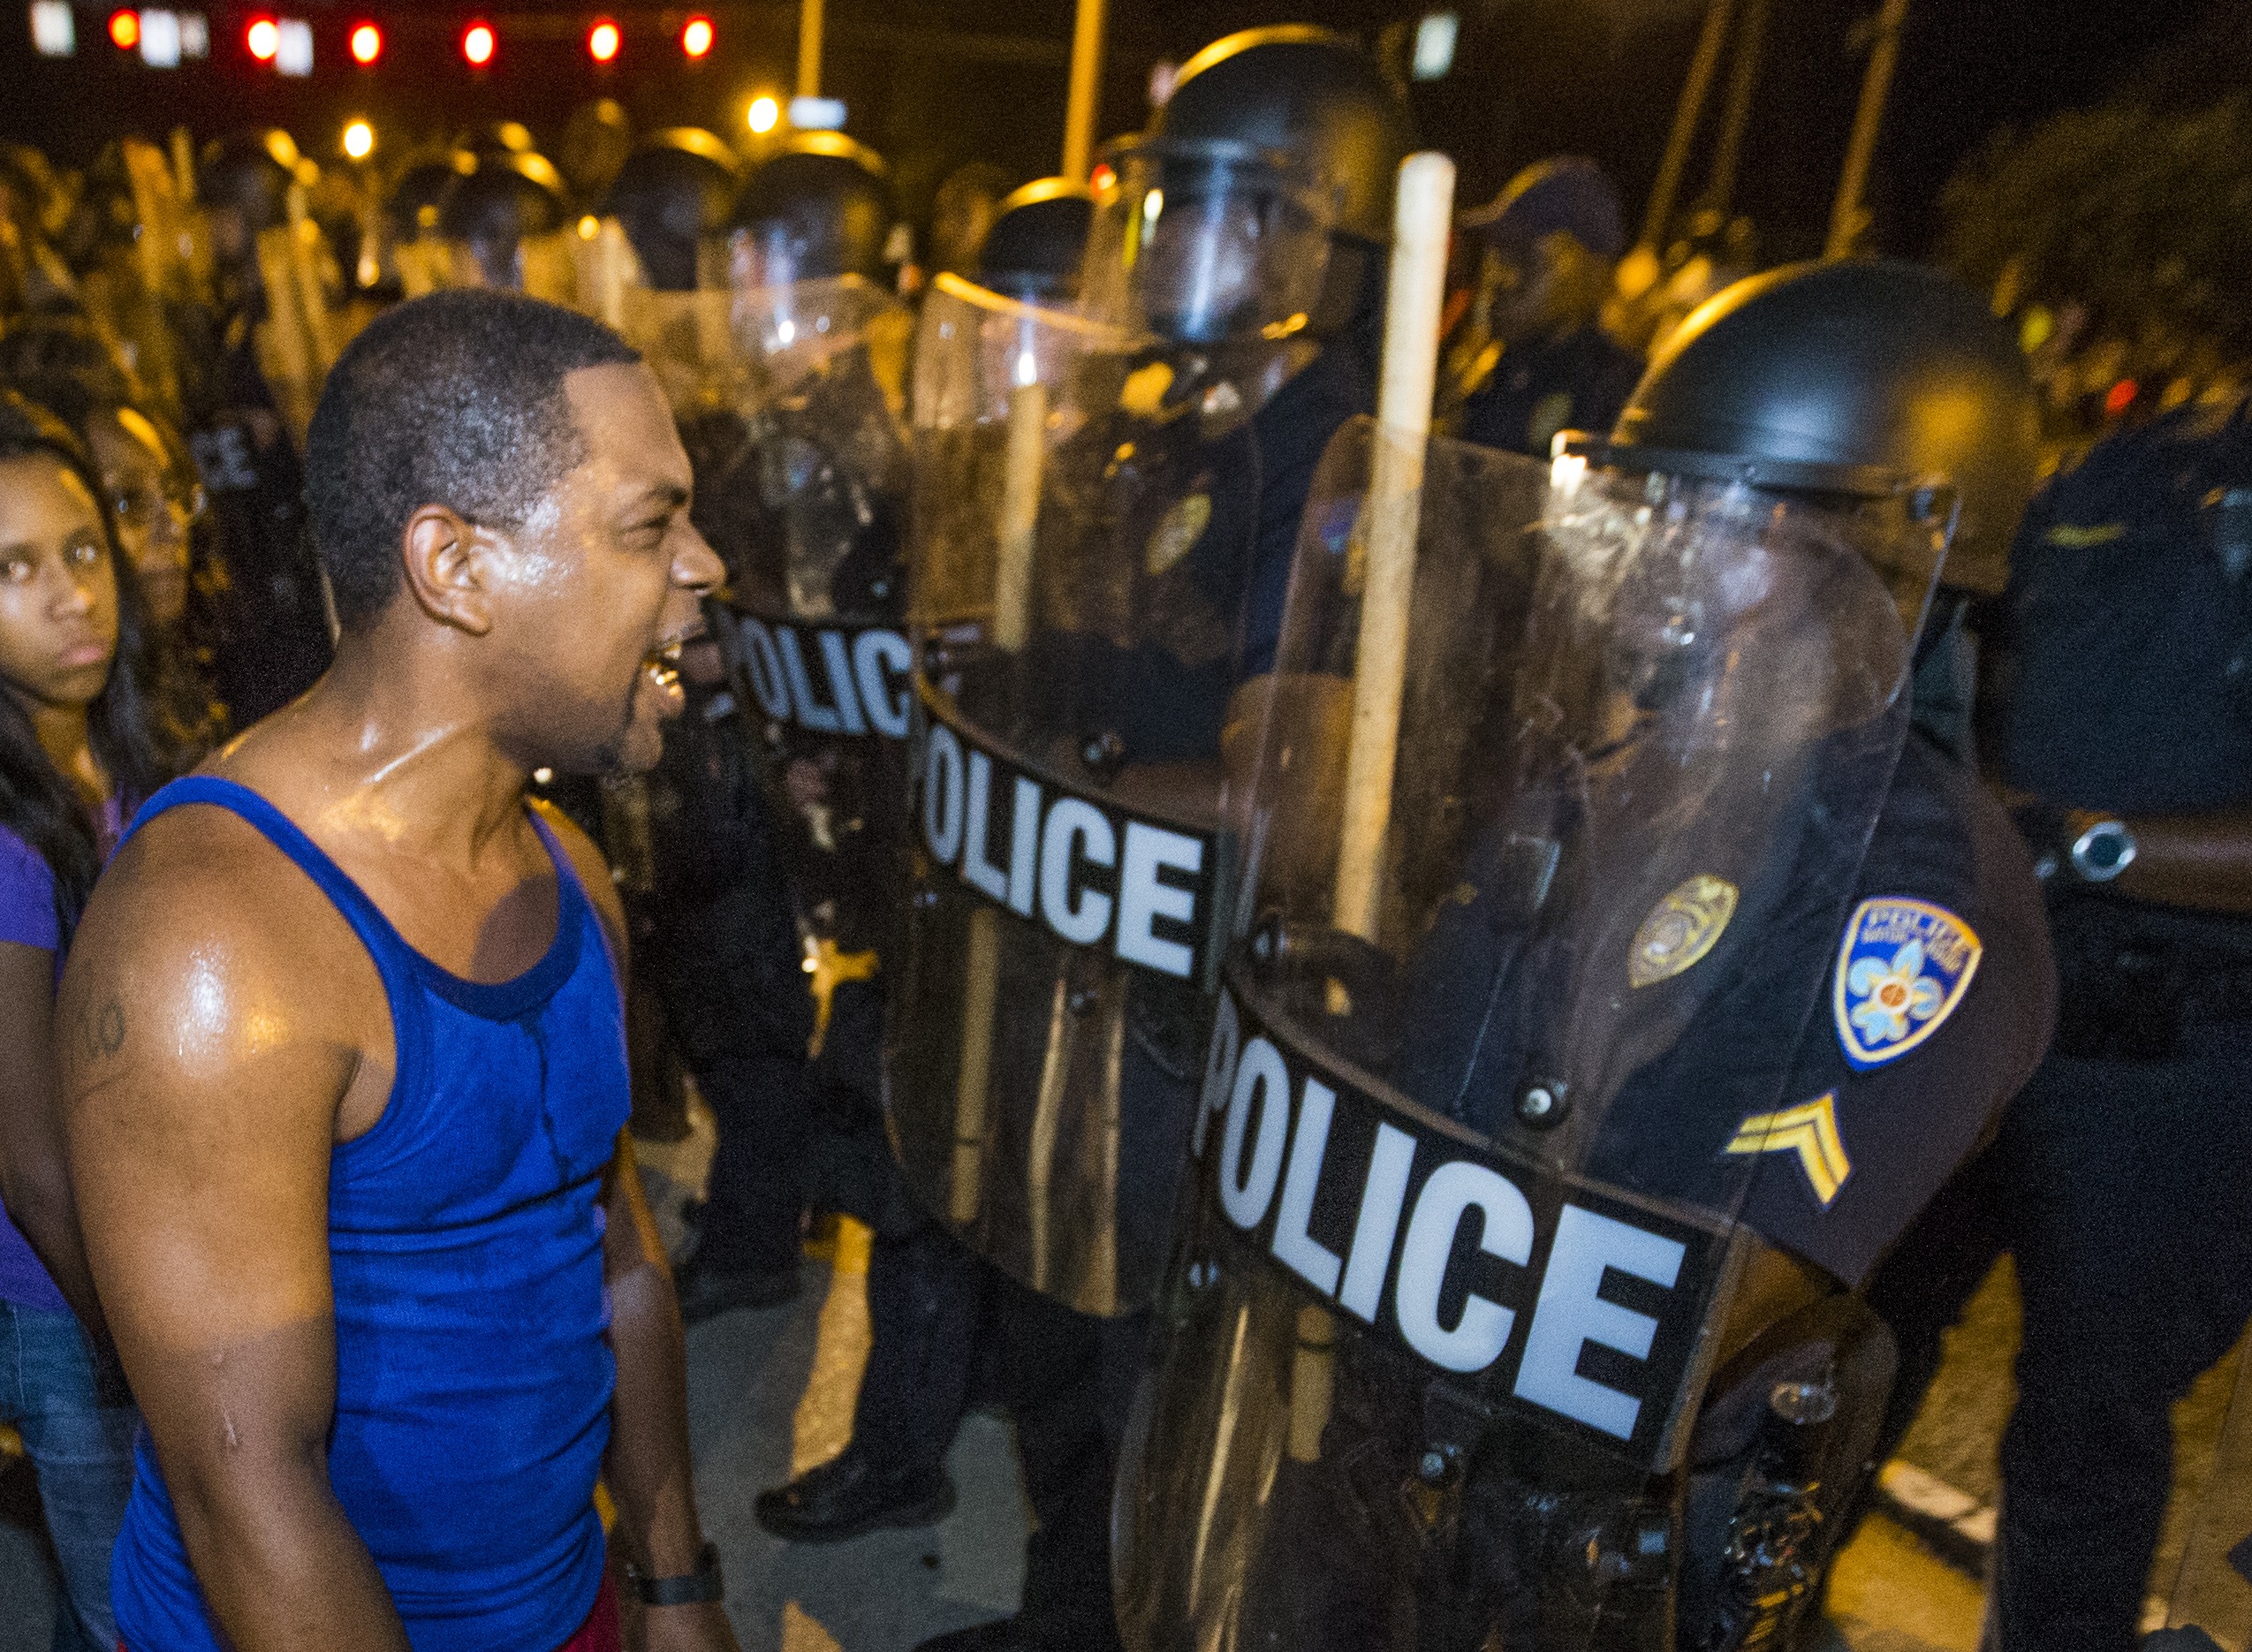 Renewed Protests Over Police Violence Spark Clashes Cbs News 